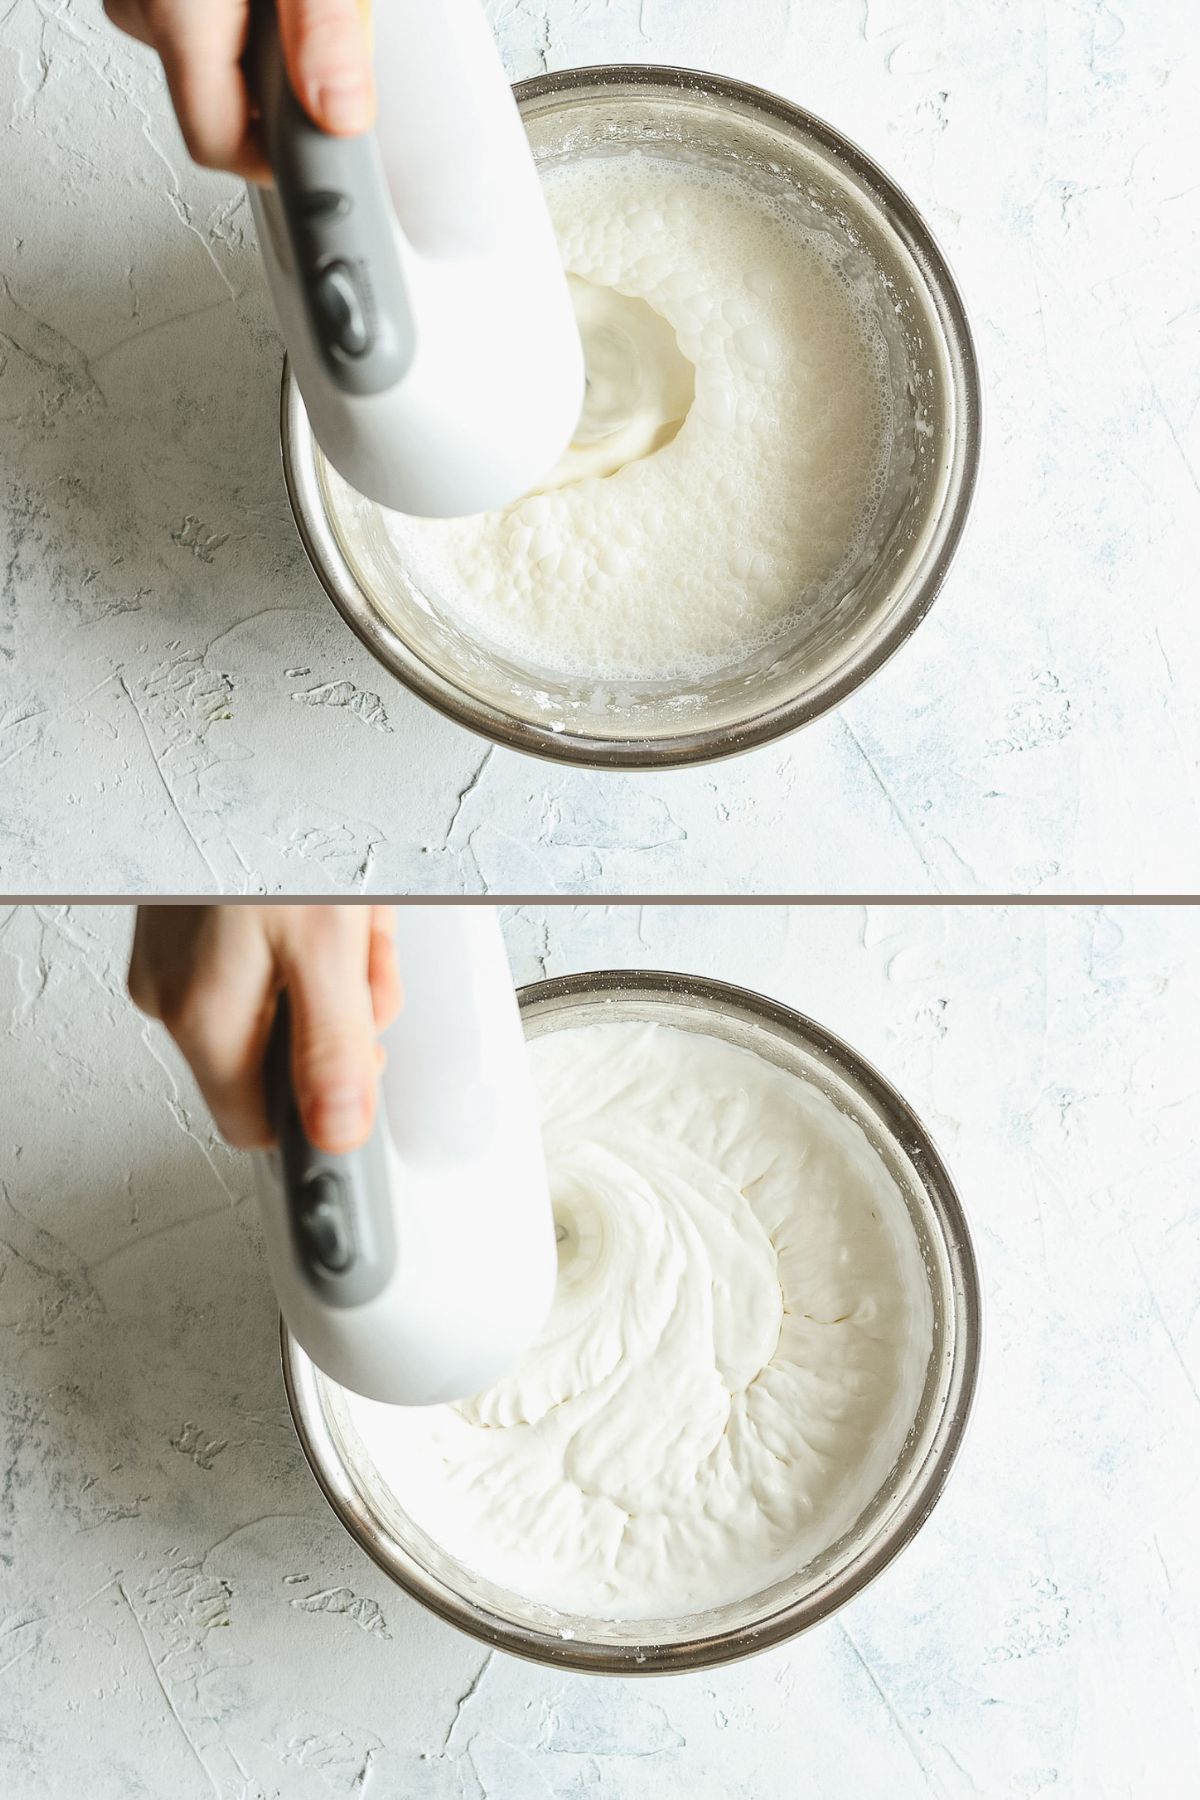 Whipping up homemade whipped cream with a hand mixer in a metal bowl.